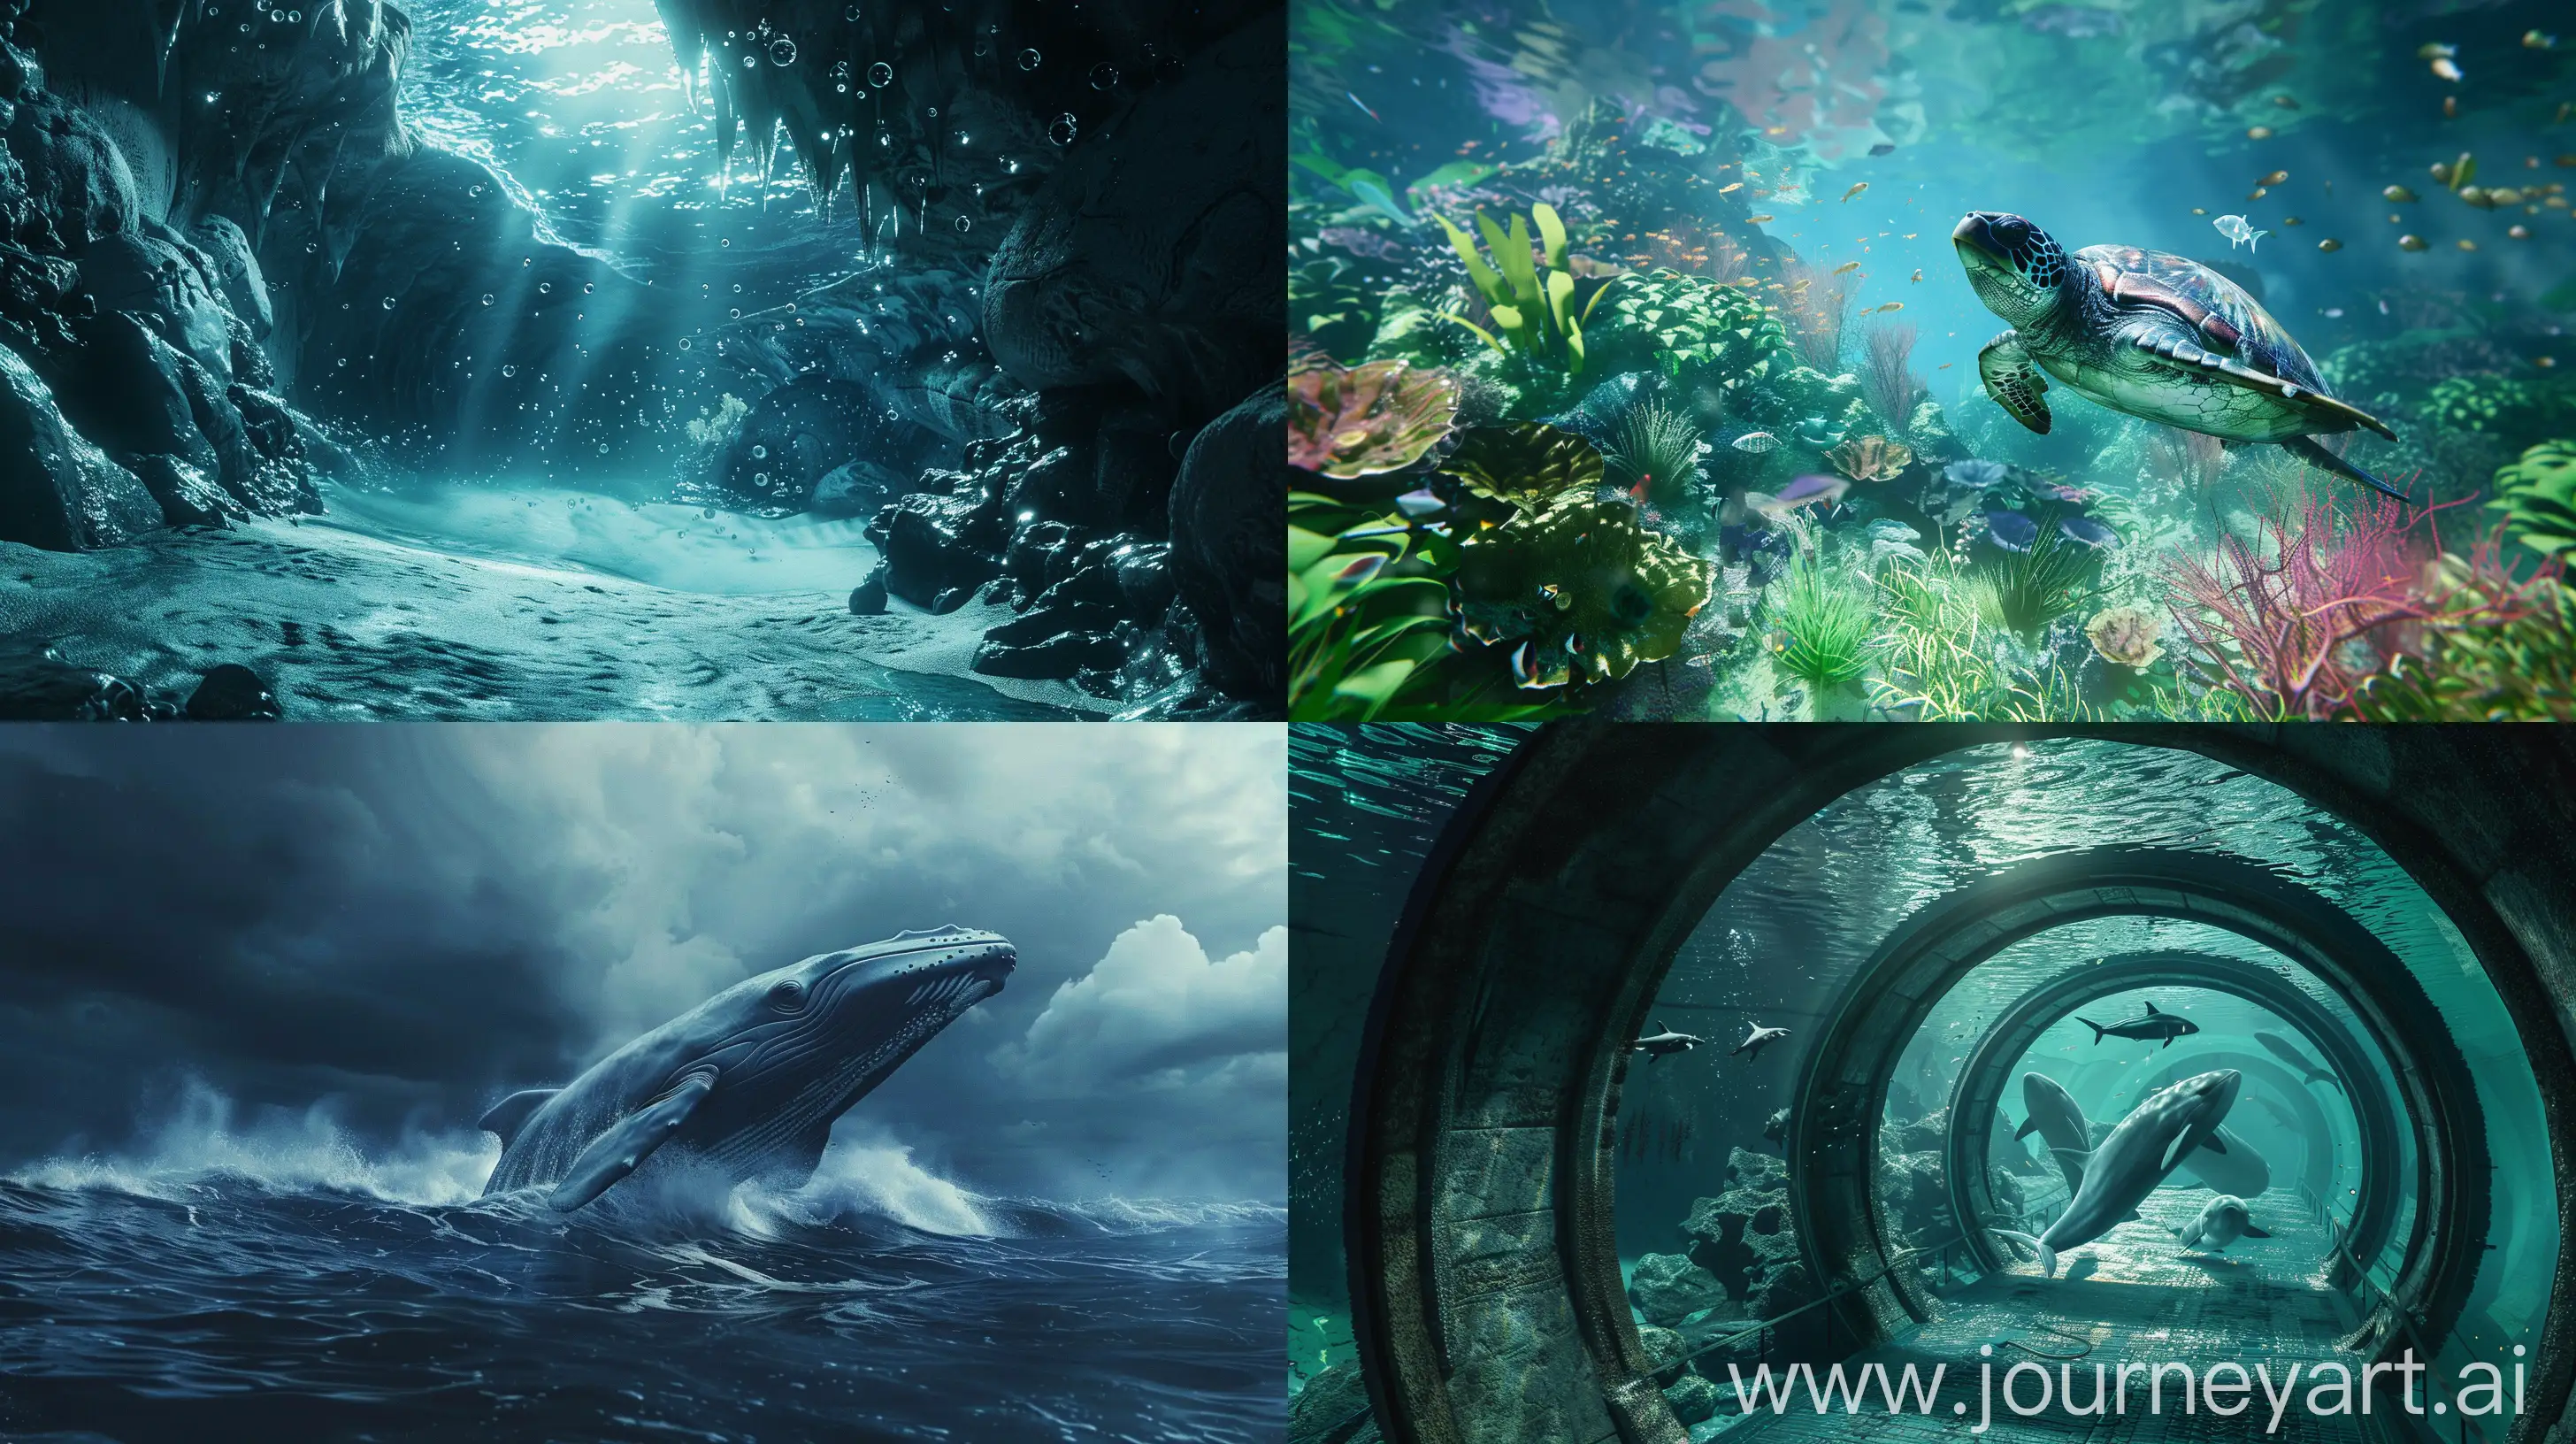 Chinese-Handsome-Boy-Encounters-Sea-Monster-in-Titanic-Style-Underwater-World